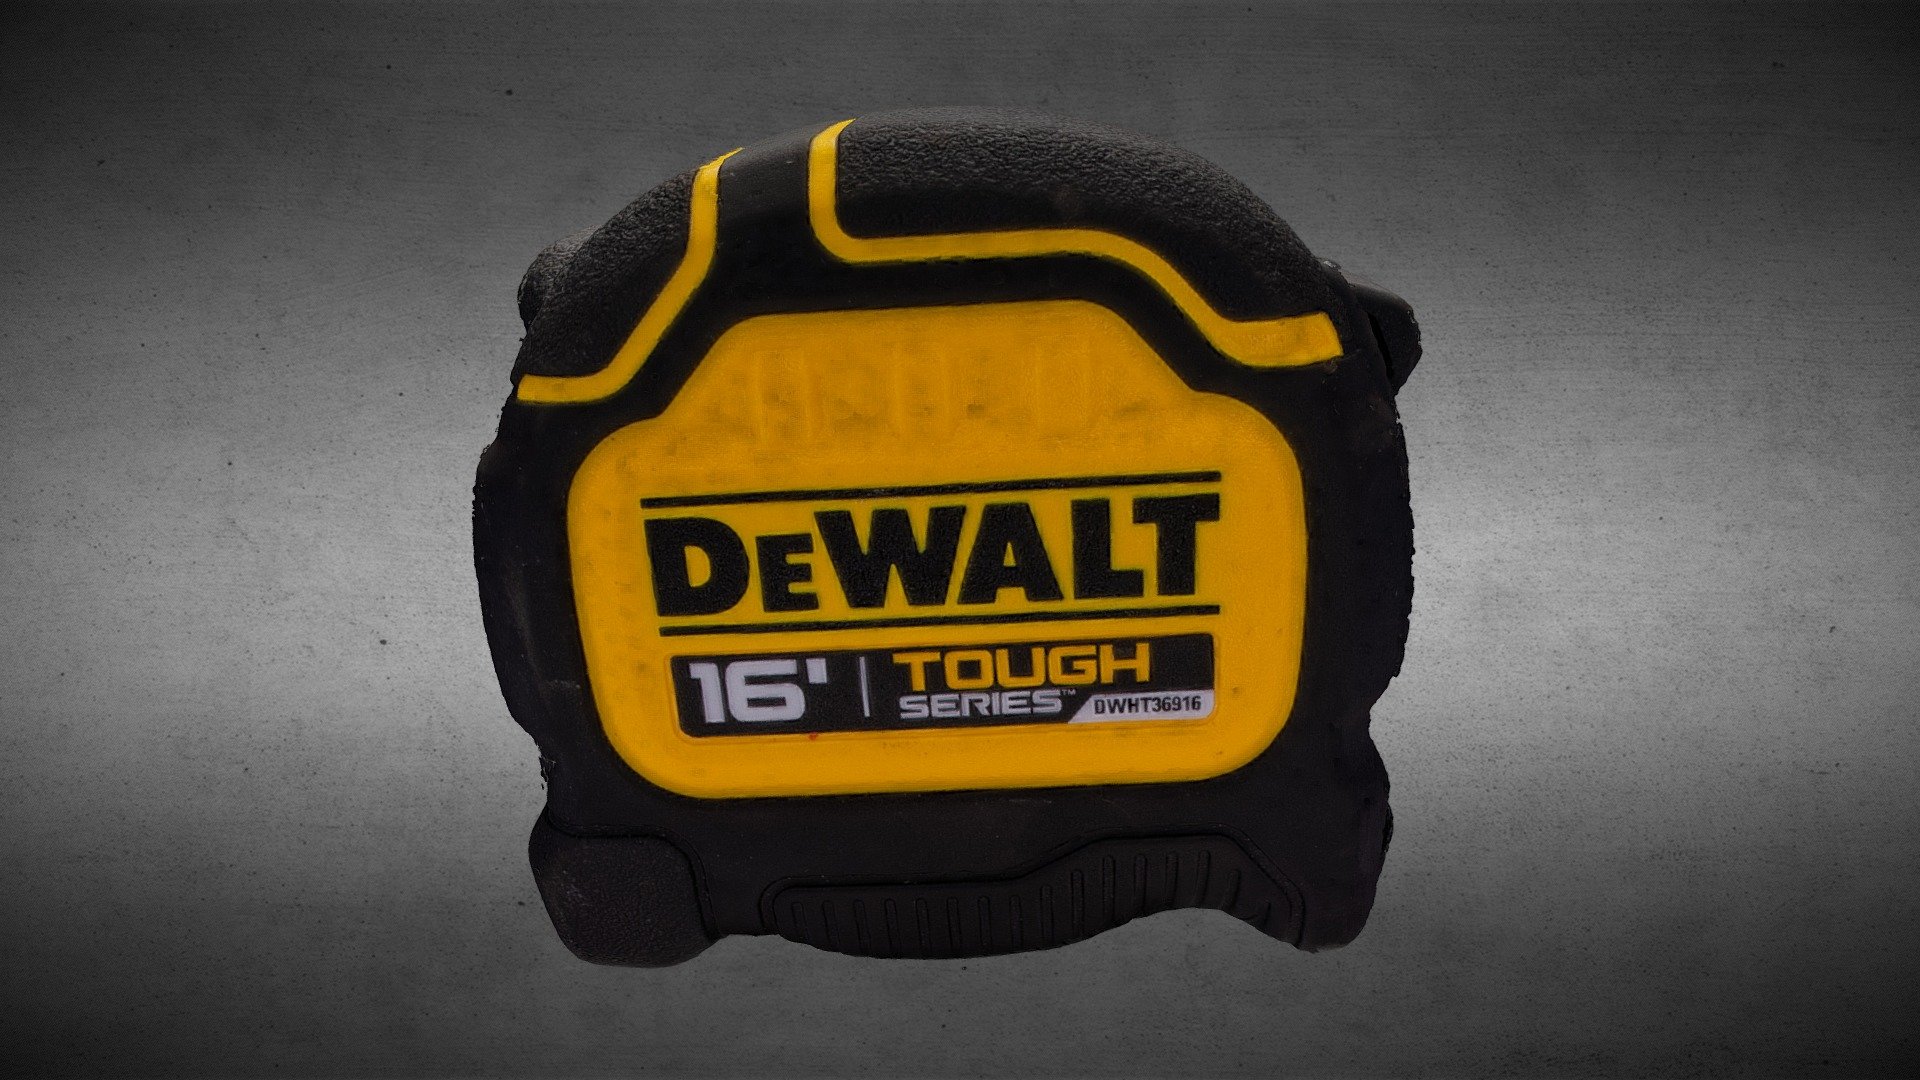 Able to survive drops up to 100 ft. this ToughSeries 16 ft. Tape Measure is the model choice for toughness. Easily execute long measurements without assistance with 16 ft. of maximum reach. Versatile ToughSeries tape measures allow you to conveniently measure from any angle and are the first in the DEWALT family to have double-sided print. Efficiently measure metal objects with a removable hook magnet while patented hook Connection technology offers full control as you work. Defend against product wear-and-tear with the 16 ft. Tape Measure hook's 6 in. Rip-Shield blade coating while the protective covering delivers optimized durability 3d model